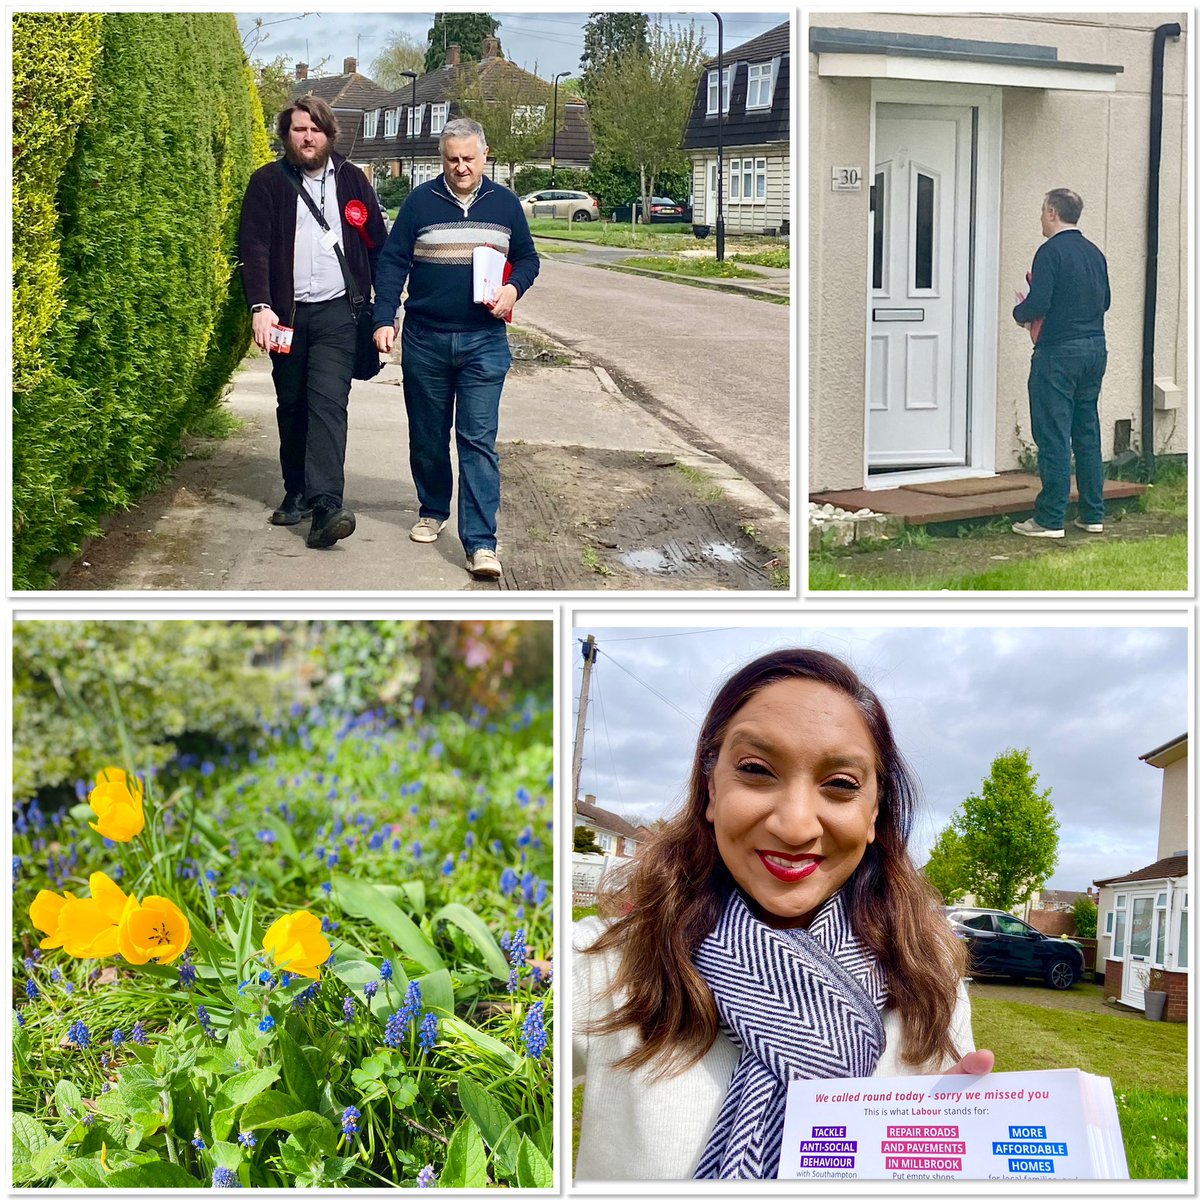 Good to see spring blooming in Millbrook estate earlier today - thanks to all those that said they’ll be voting labour this time… Christain won last year here by only 23 votes, so every vote matters! #VoteLabourMay2nd